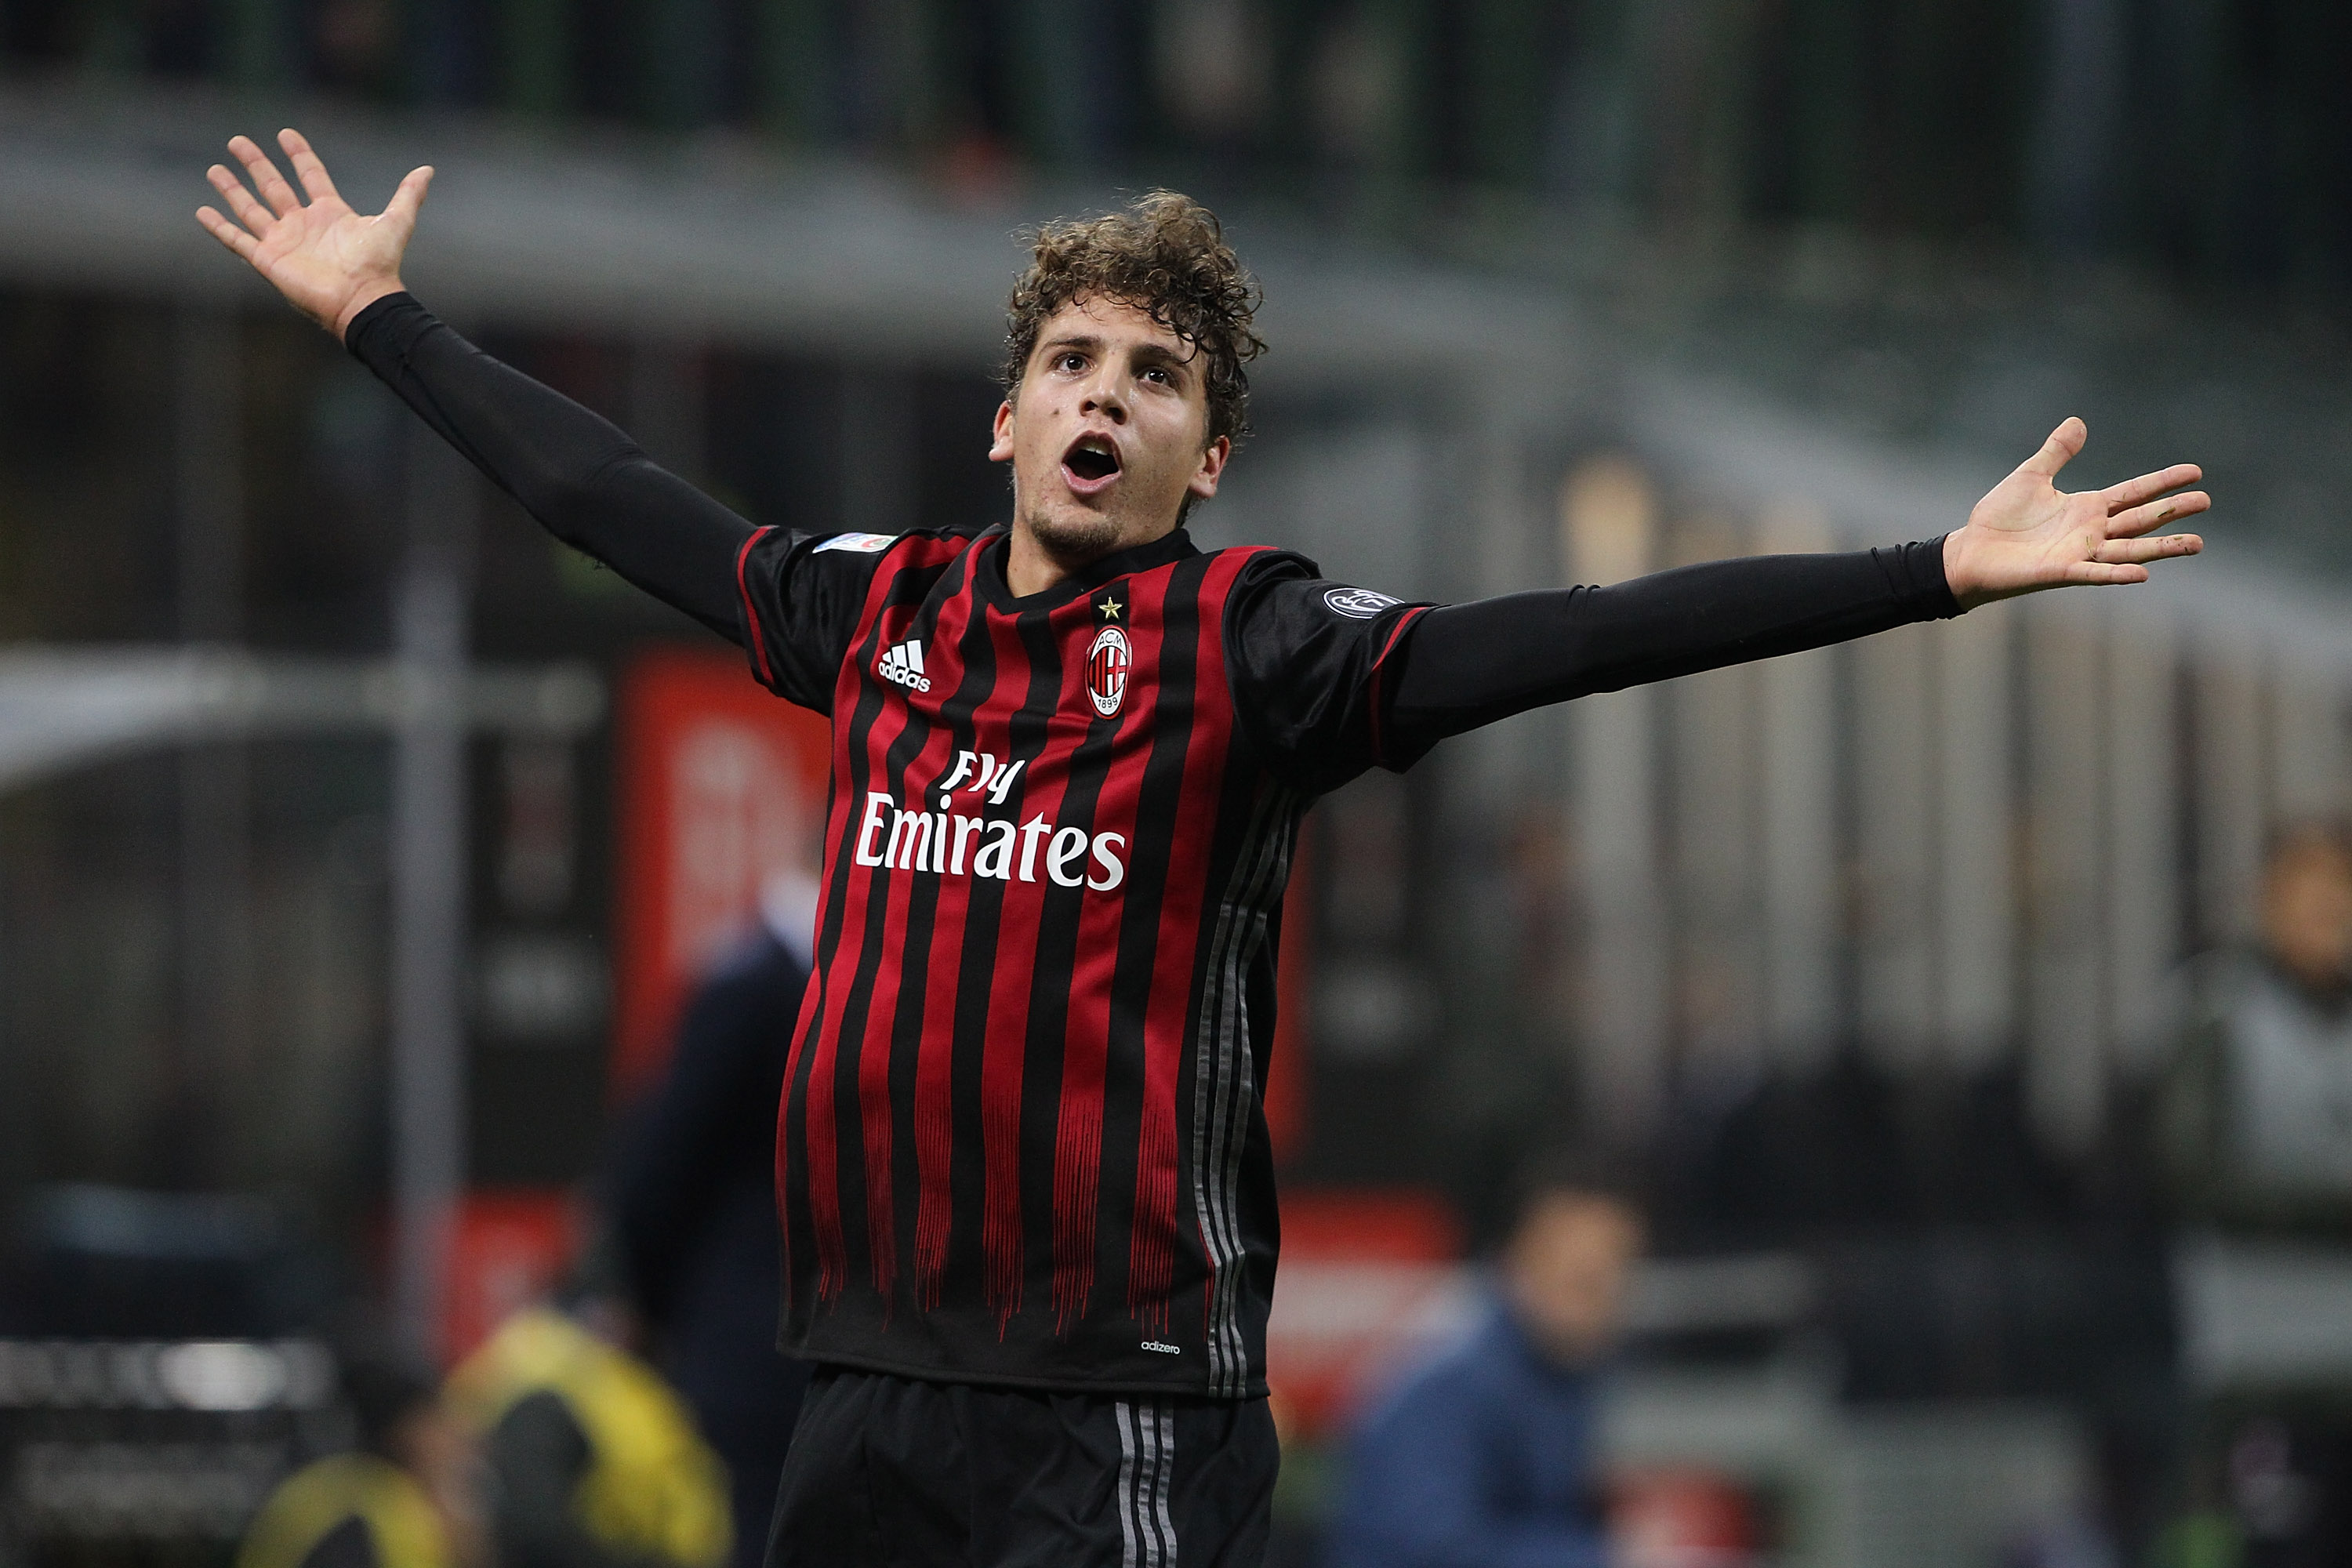 Oprør gardin Valnød Locatelli hints he would consider AC Milan return: "They have remained in  my heart"